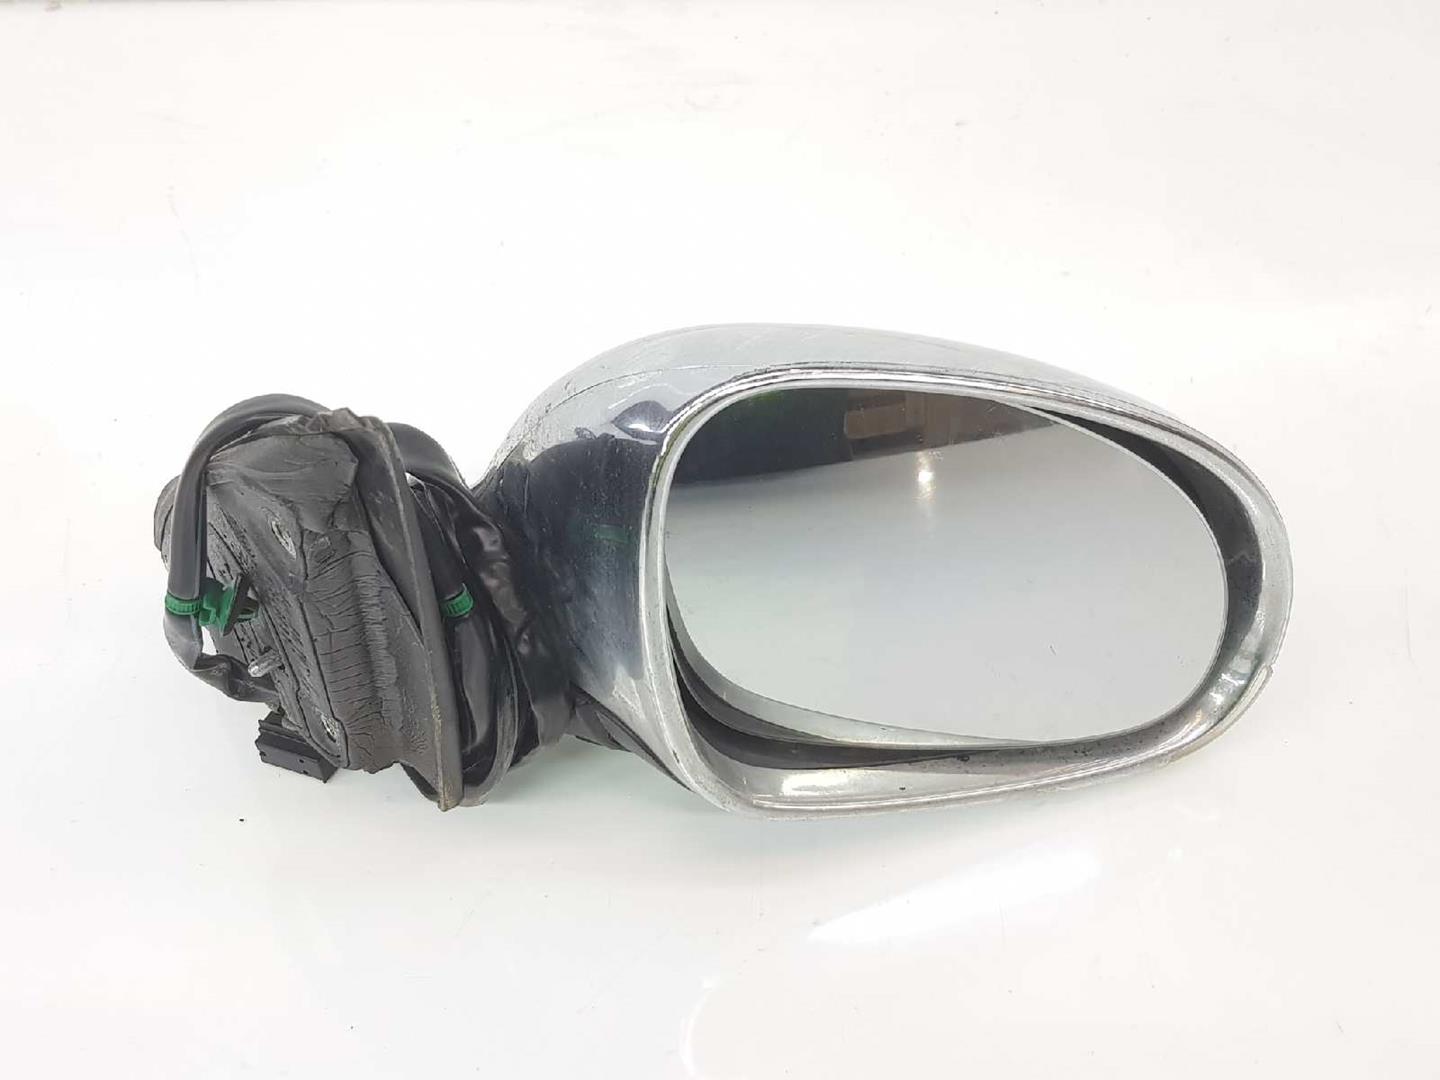 VOLKSWAGEN Passat B6 (2005-2010) Right Side Wing Mirror 3C0857934, TAPA3C0857538A, COLORGRISA7T 19889682